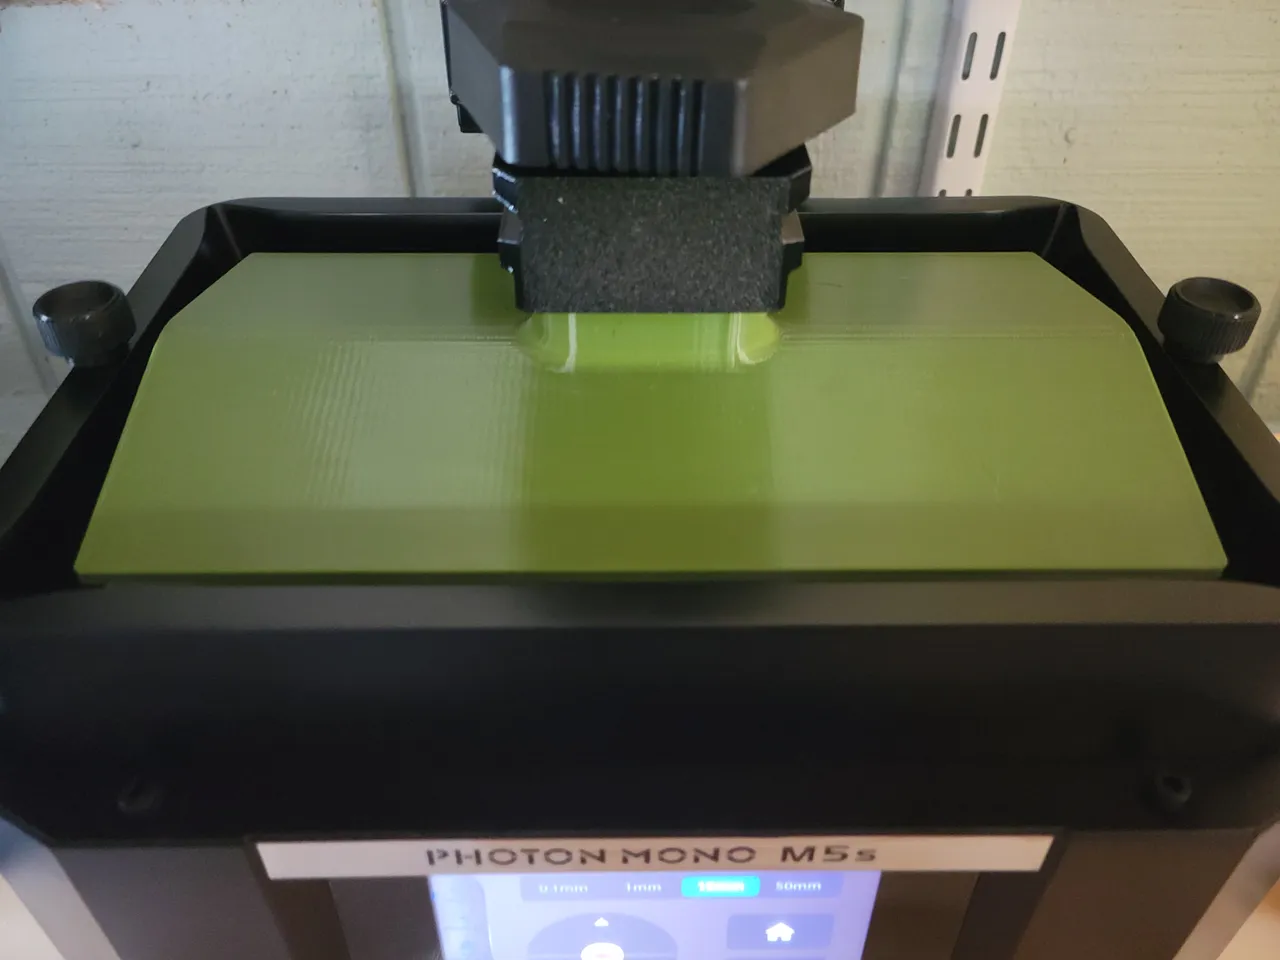 Anycubic Photon Mono M5 vs M5s - Spot the Difference 